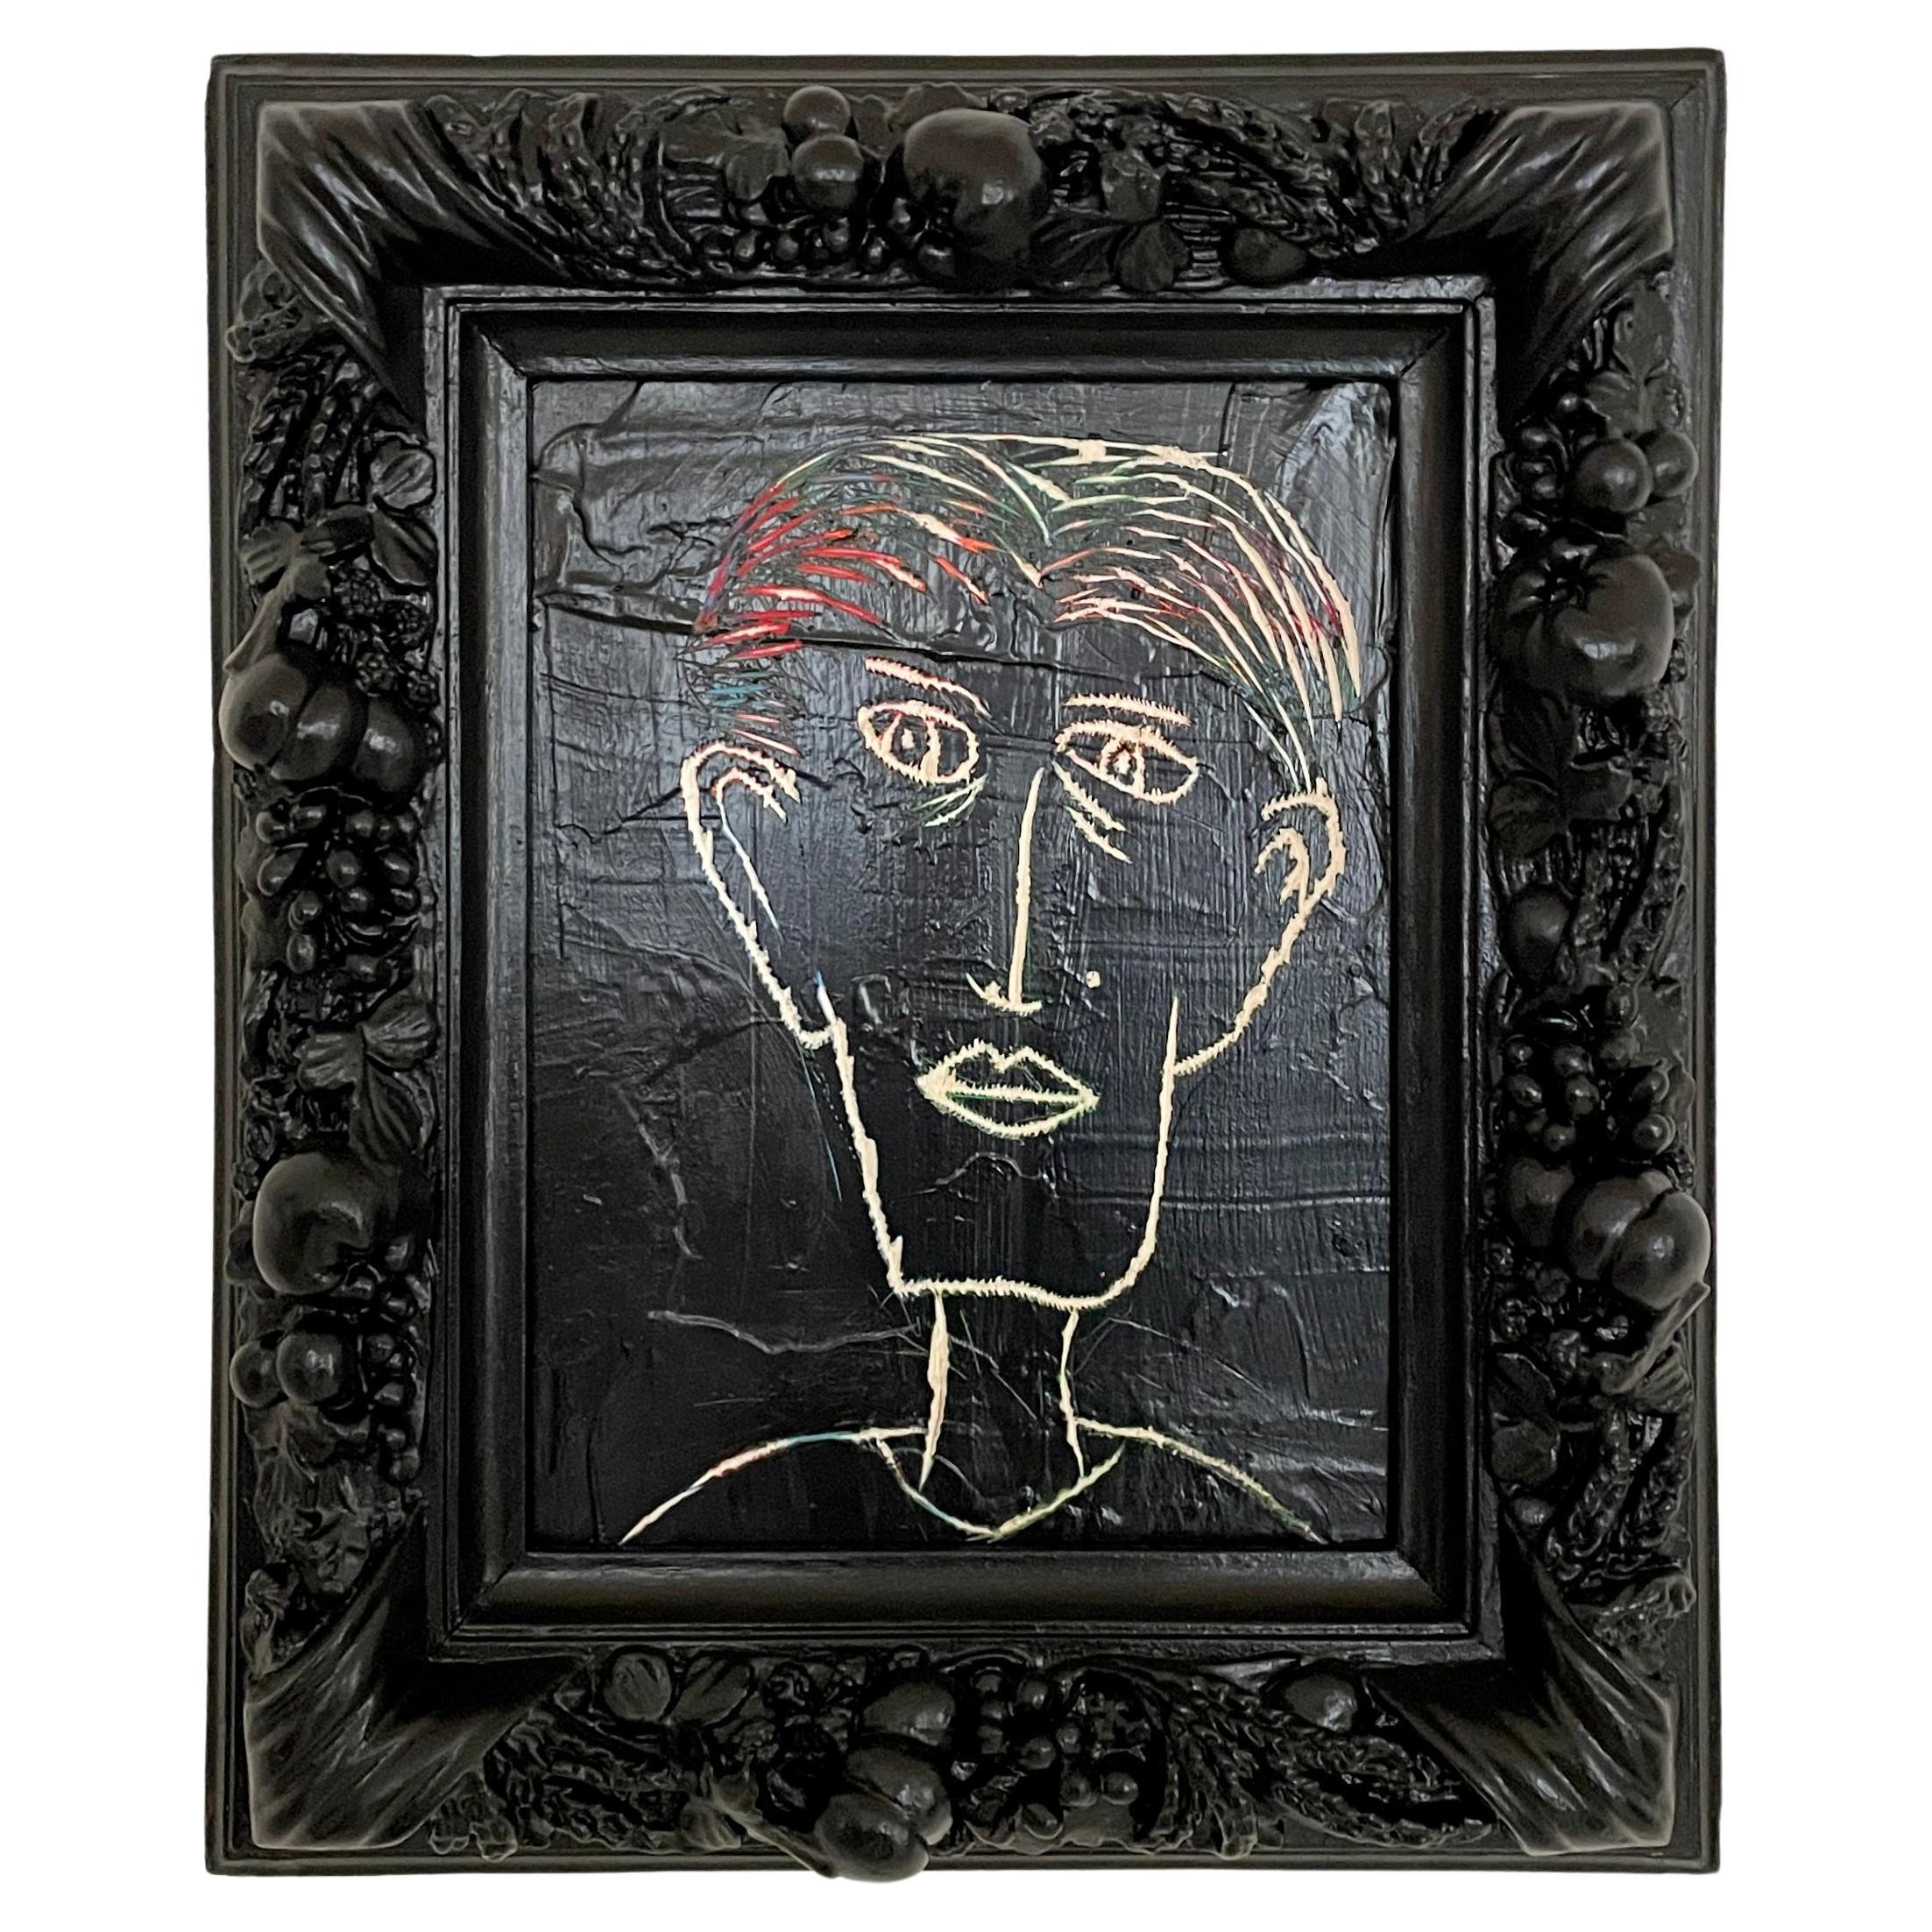 Contemporary Modern Acrylic Black Painting on Wood Framed in an Old Frame